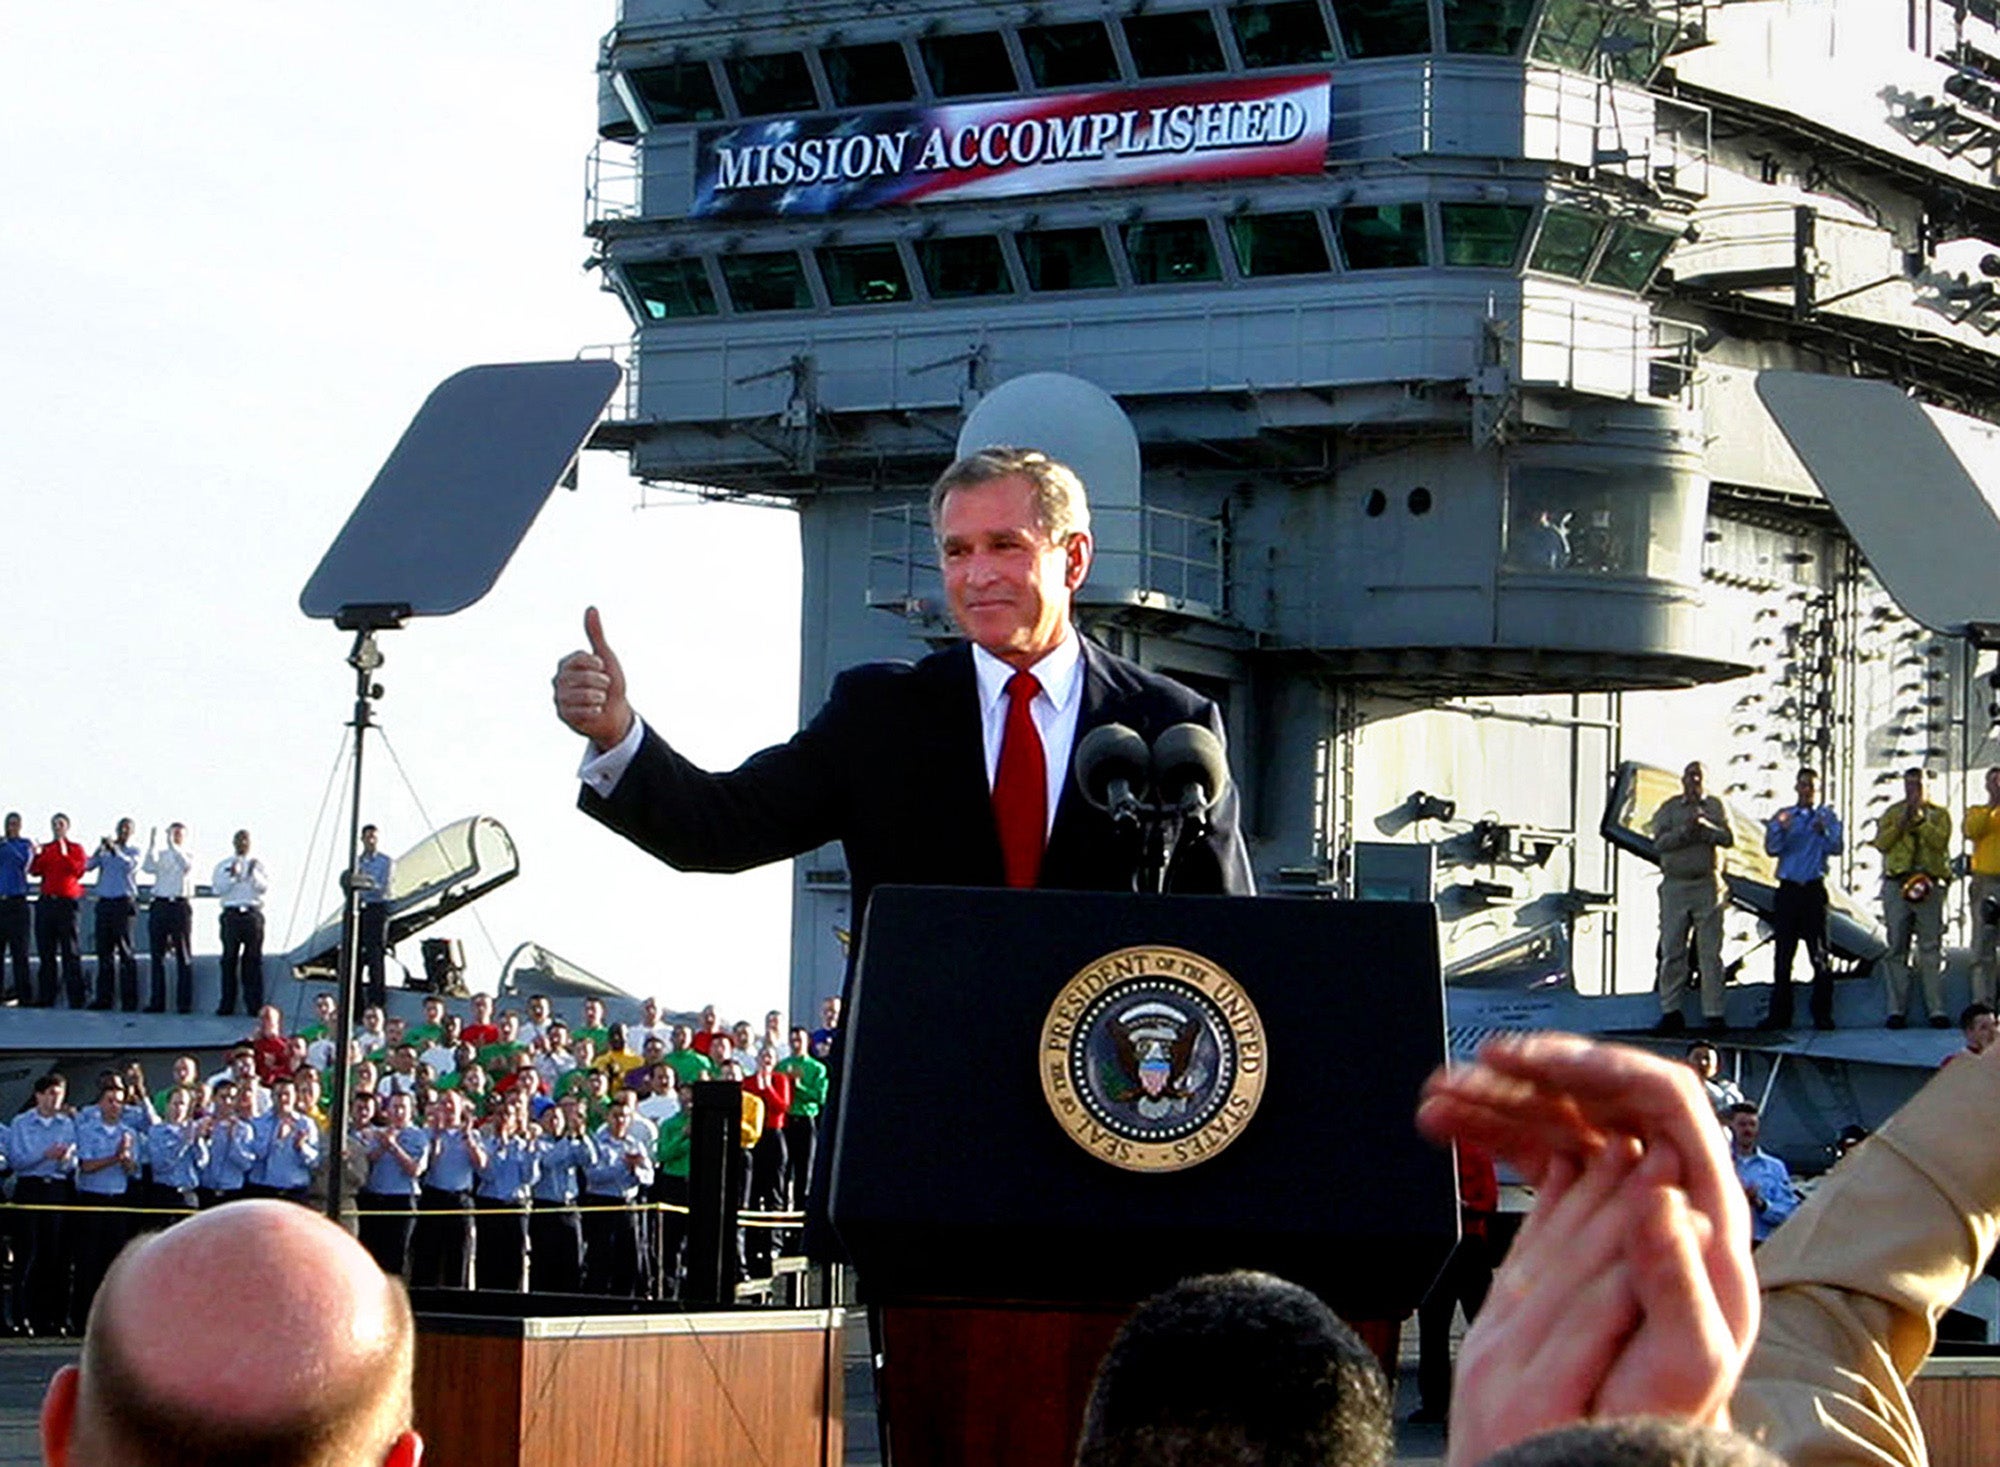 George W Bush declares ‘mission accomplished’ in Iraq aboard an aircraft carrier in 2003